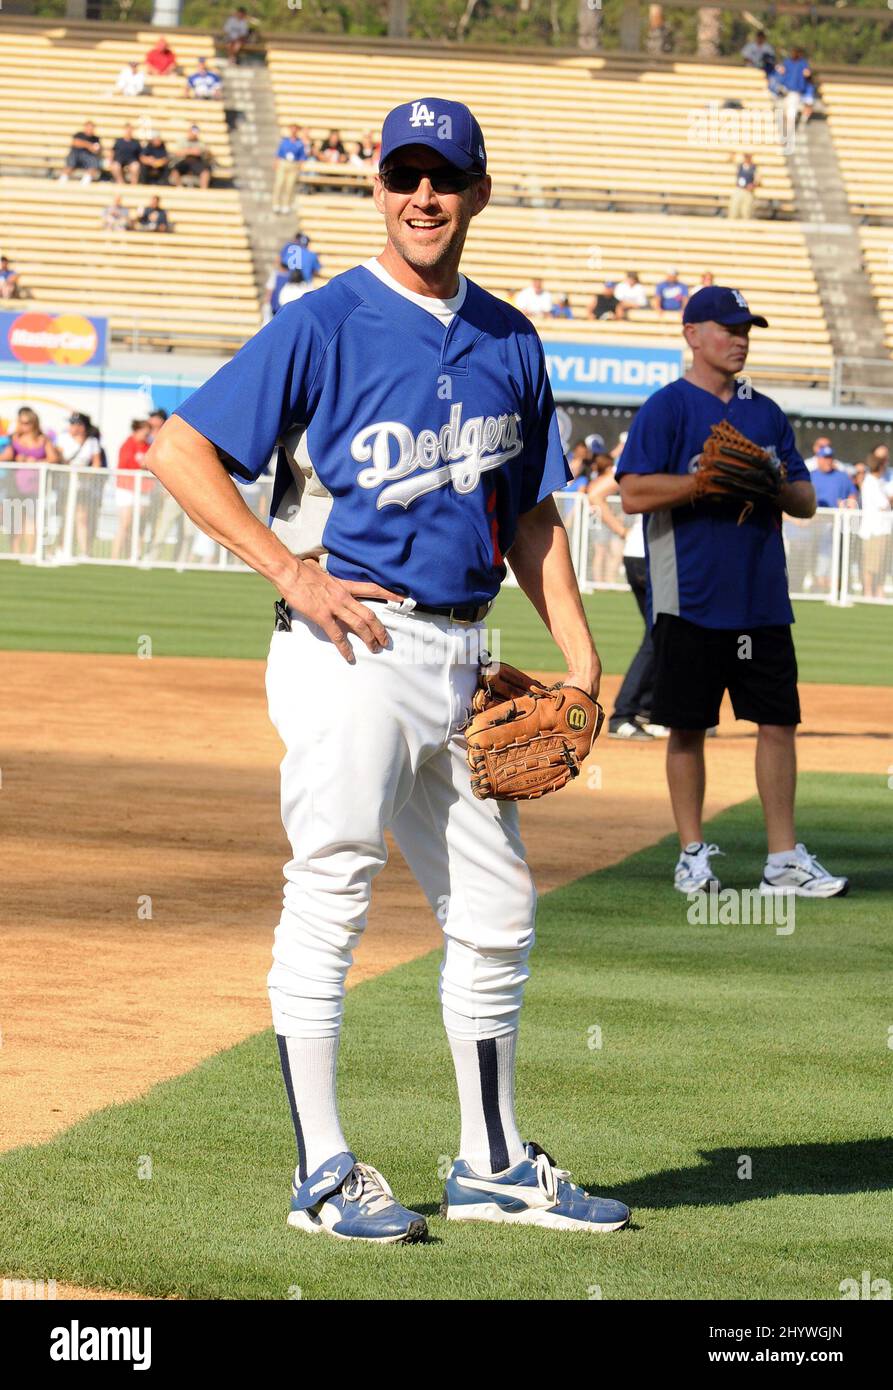 James Denton at the 51st Annual Hollywood Stars Game held at Dodger Stadium in Los Angeles, USA Stock Photo